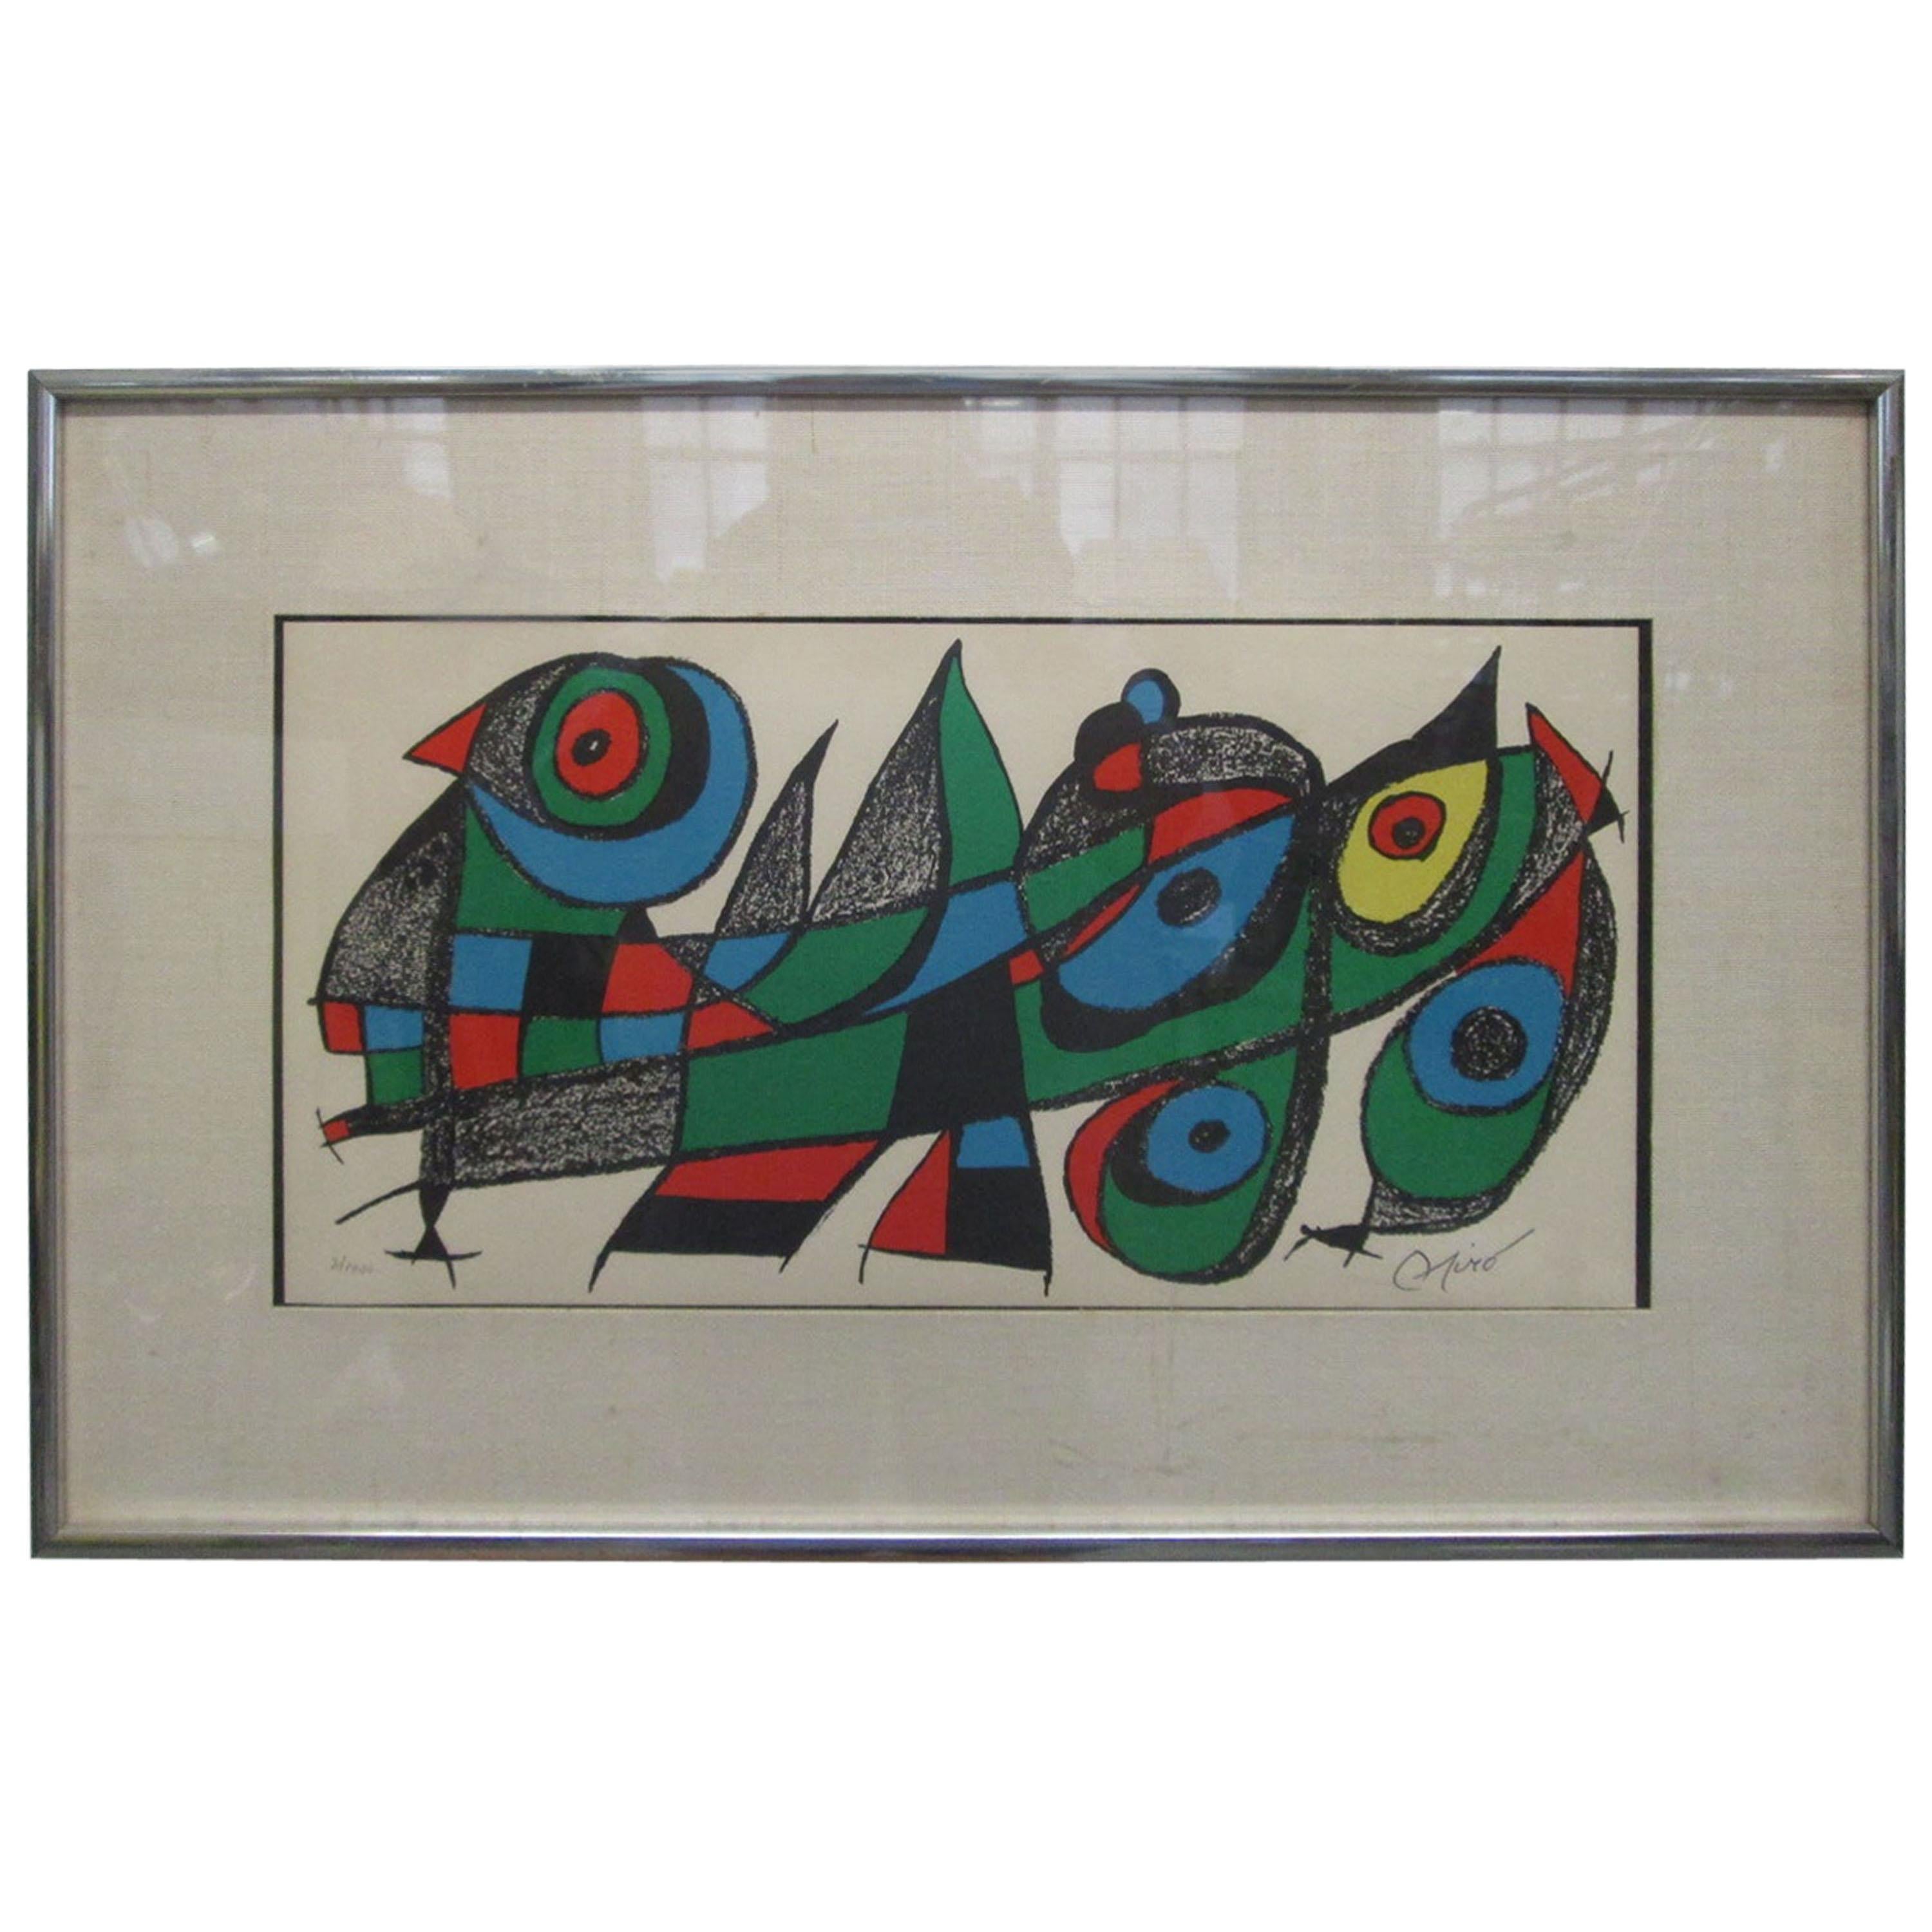 Joan Miro Lithograph Titled "Miro Sculptor Japan, " Signed and Numbered For Sale